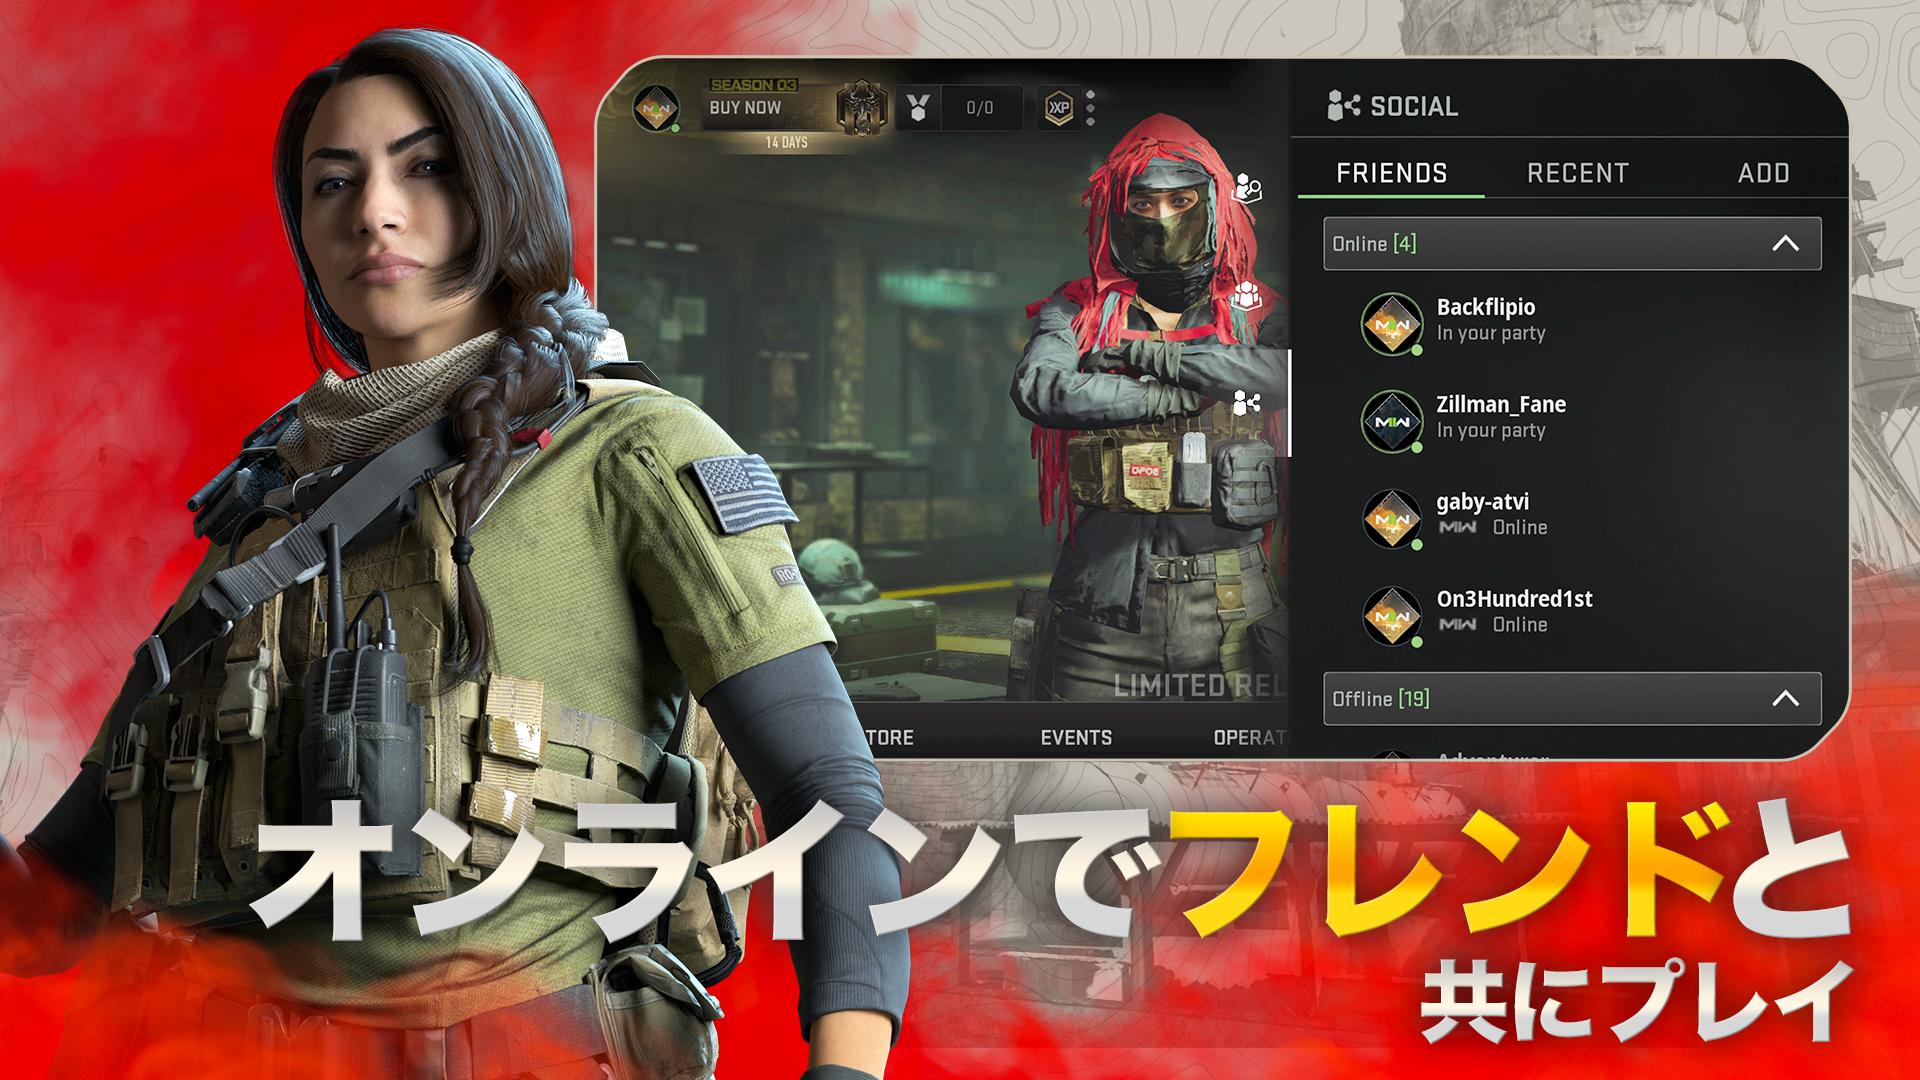 Download Call of Duty: Warzone Mobile 3.0.1.16825631 for Android